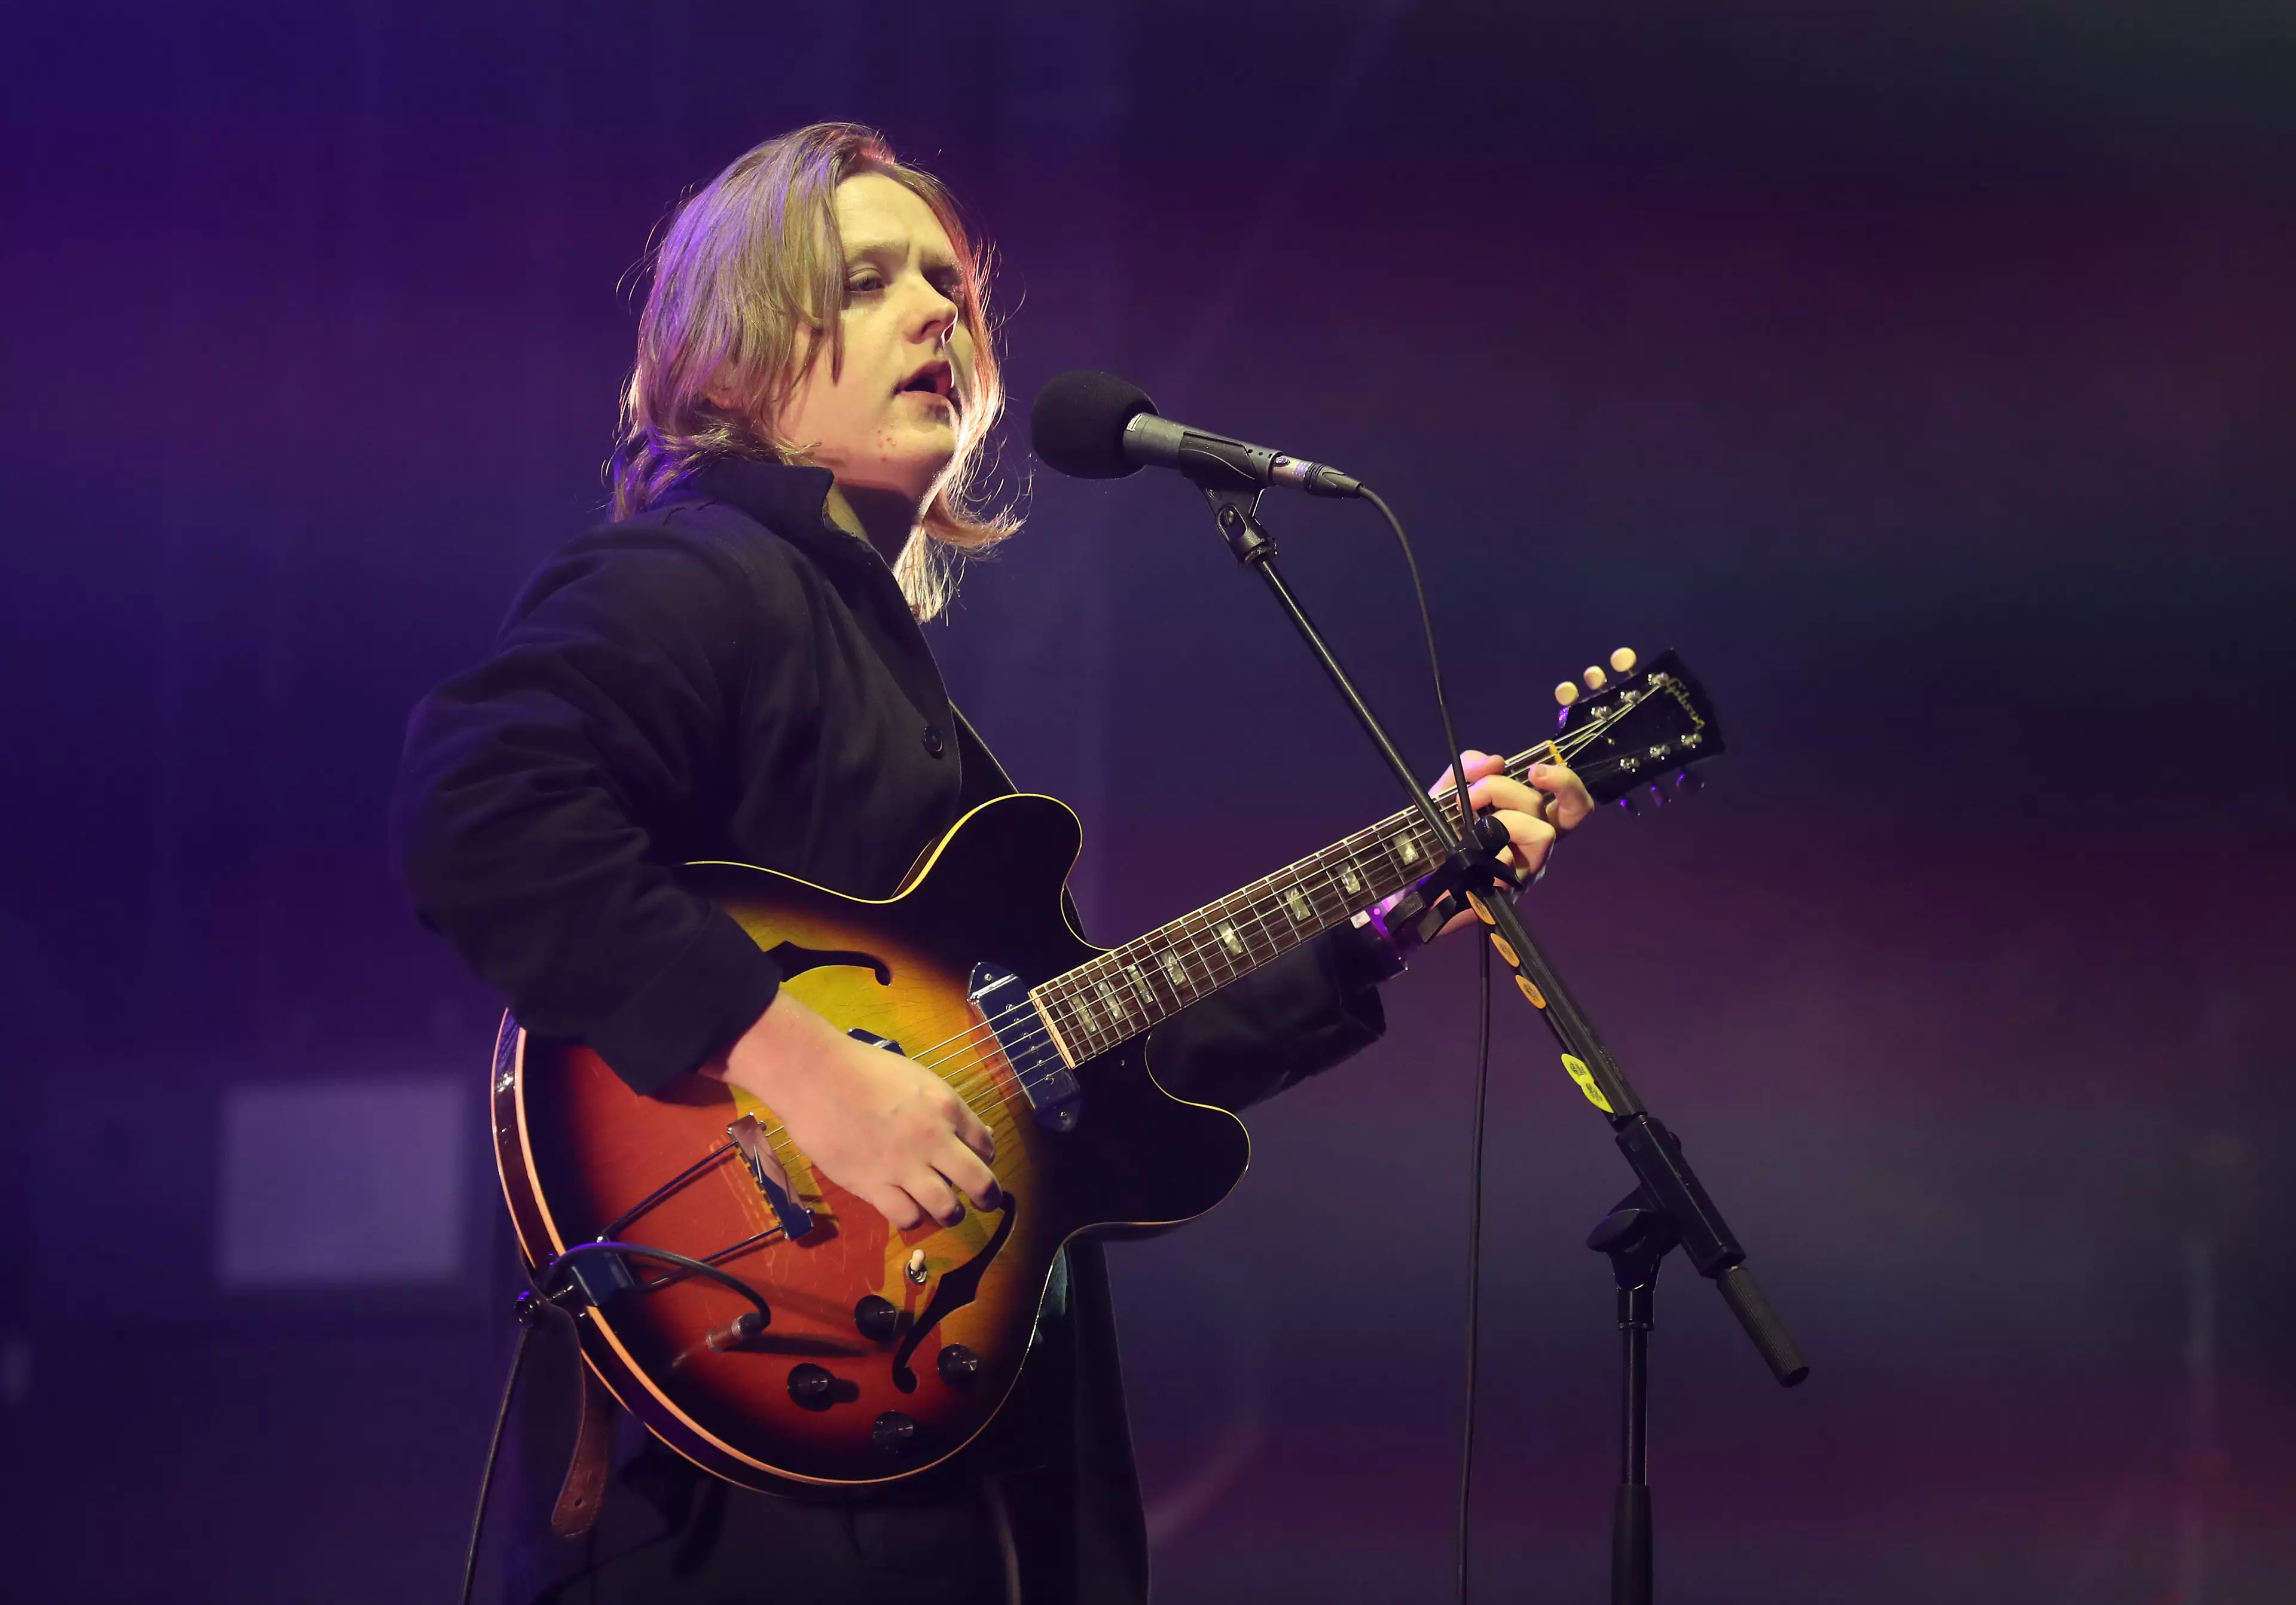 Chart-topper Lewis Capaldi is on tour in 2019/20